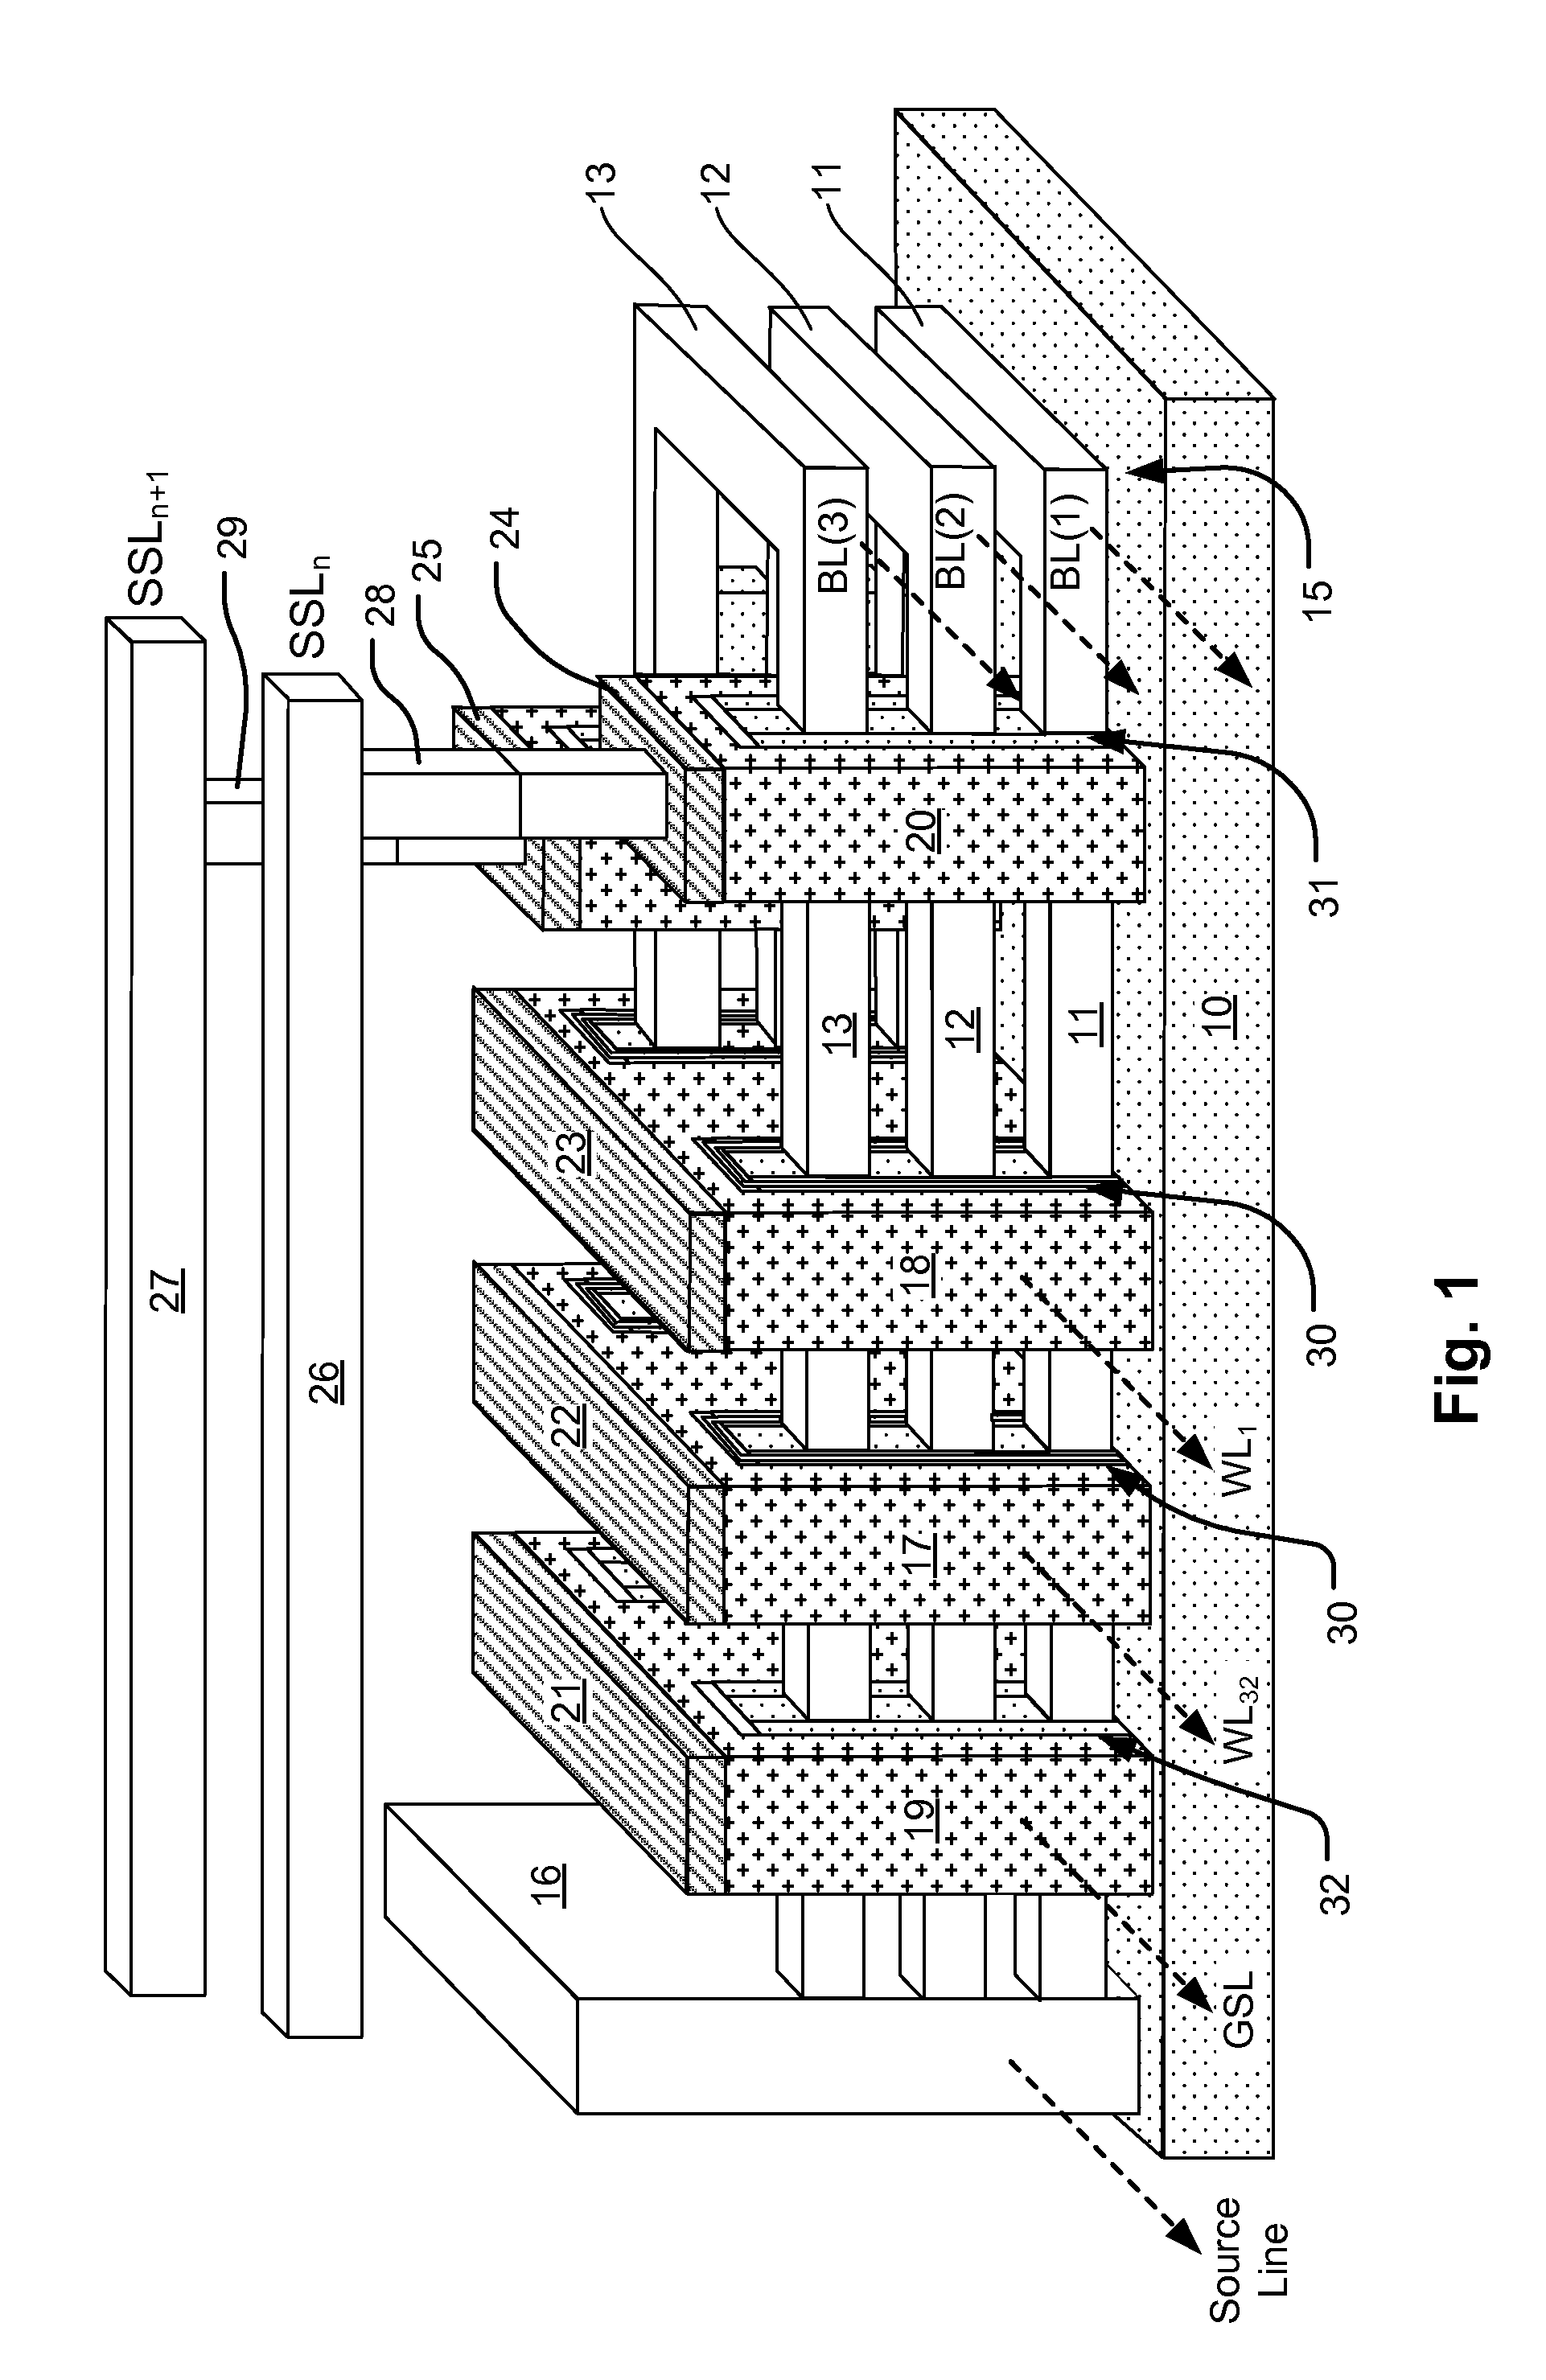 NAND flash with non-trapping switch transistors